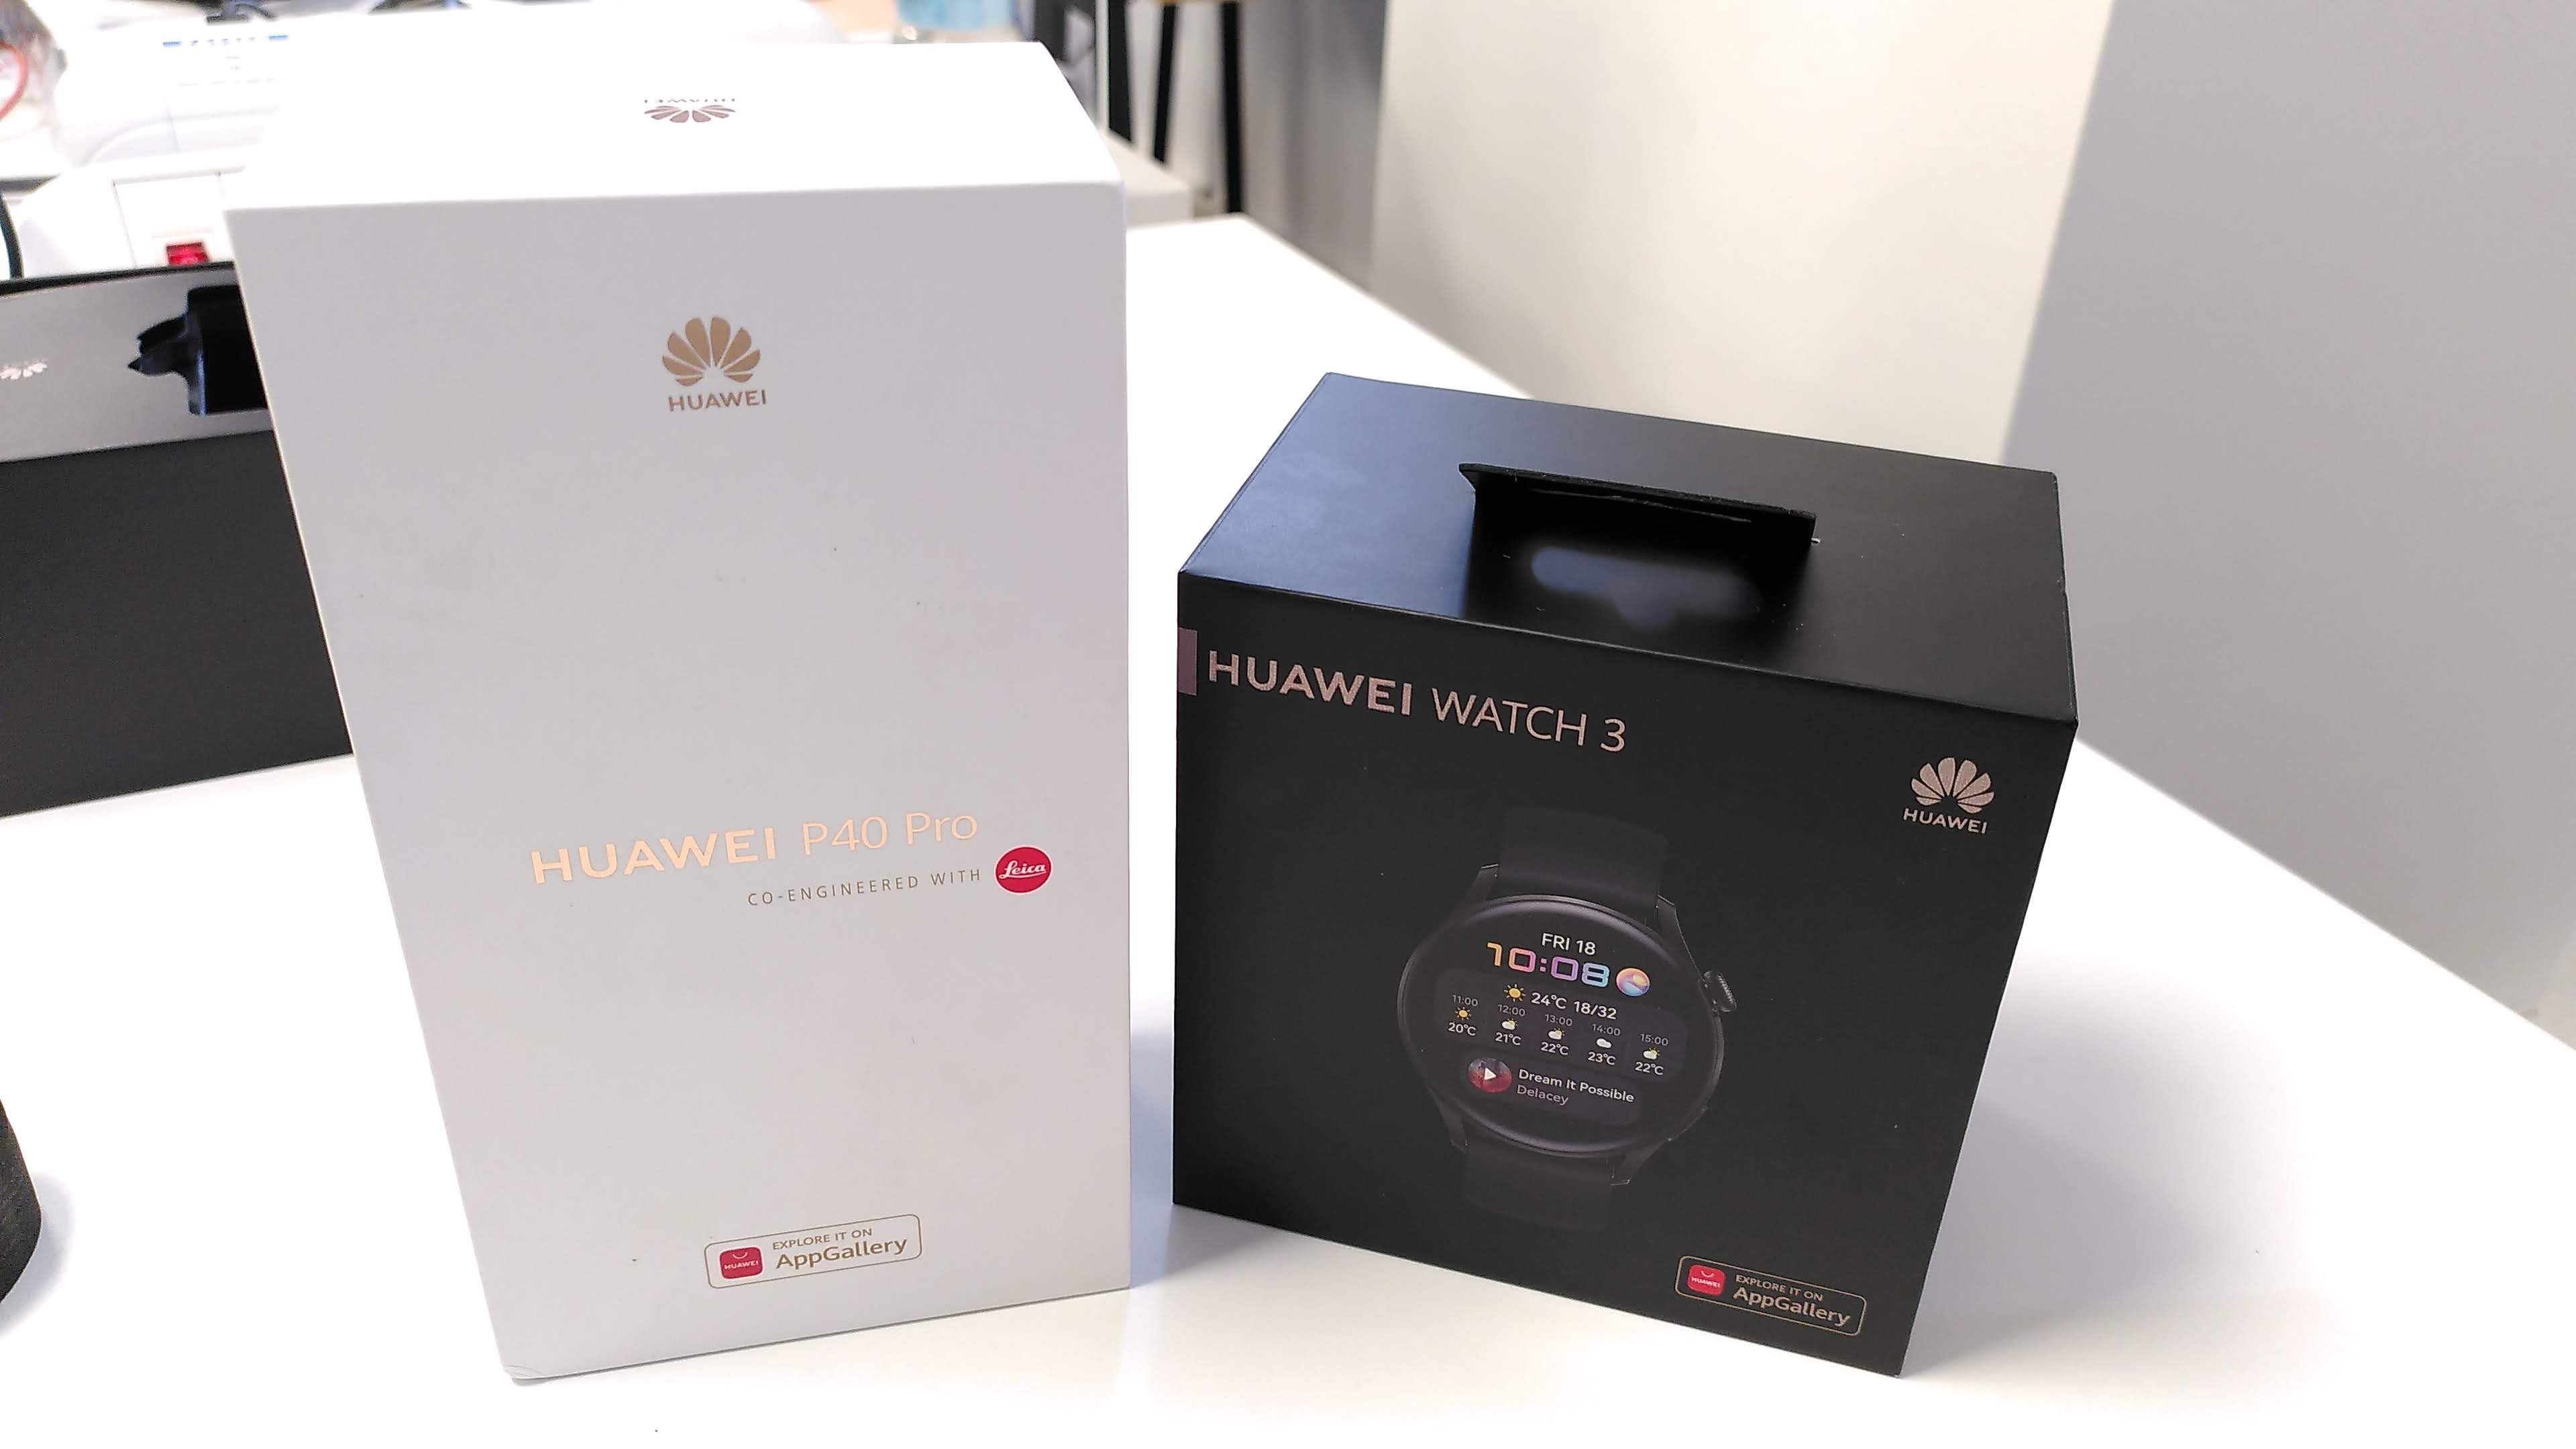 Huawei Watch 3 and P40 Pro boxes